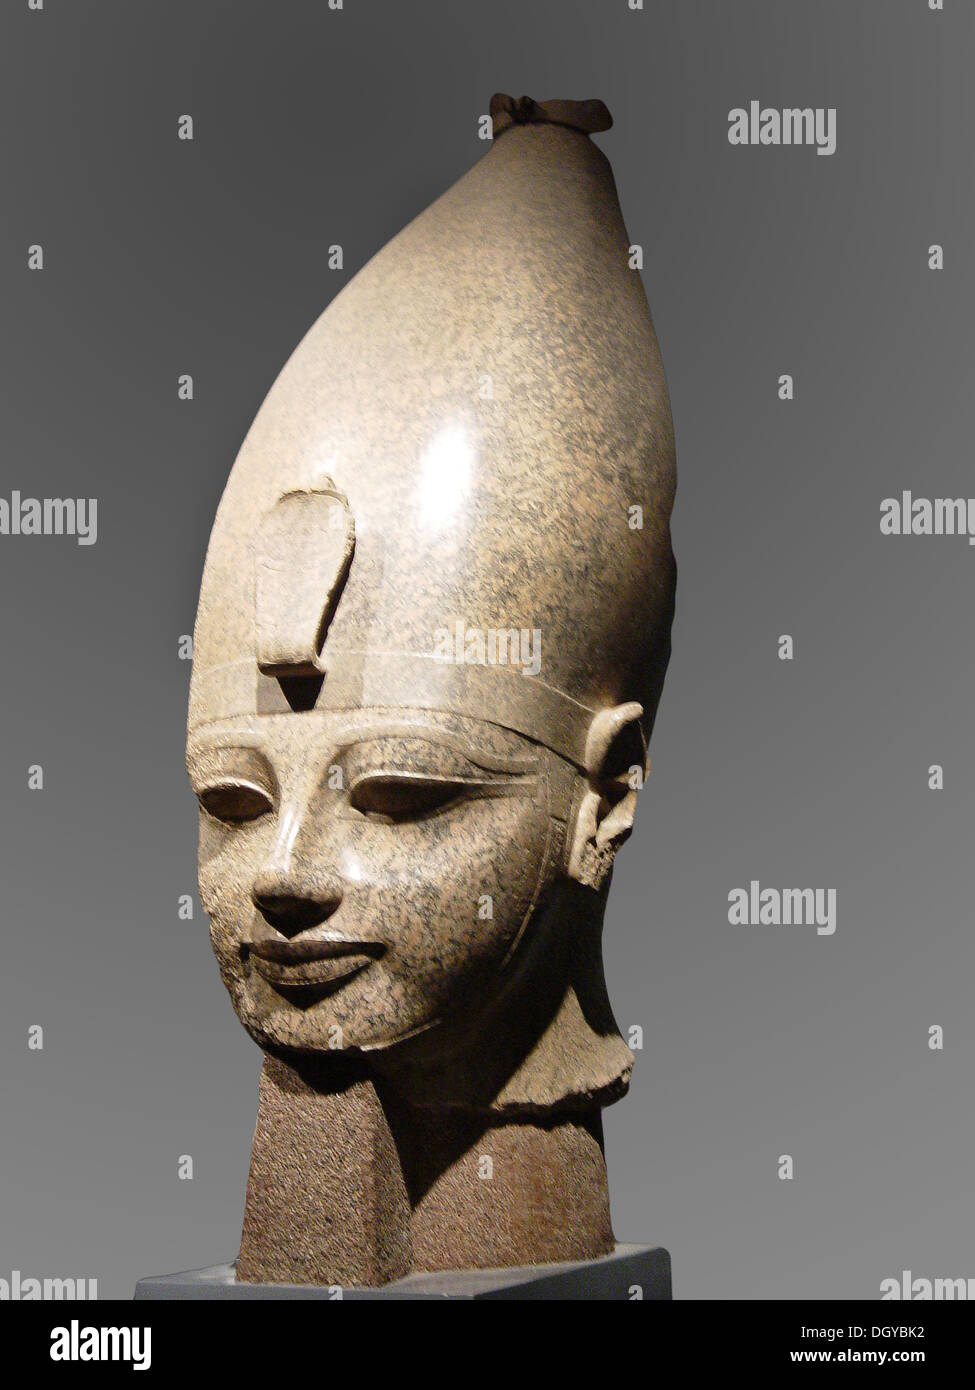 5724. Pharaoh Amenhotep III, ruler of Egypt from 1386 to 1349 BC Stock Photo